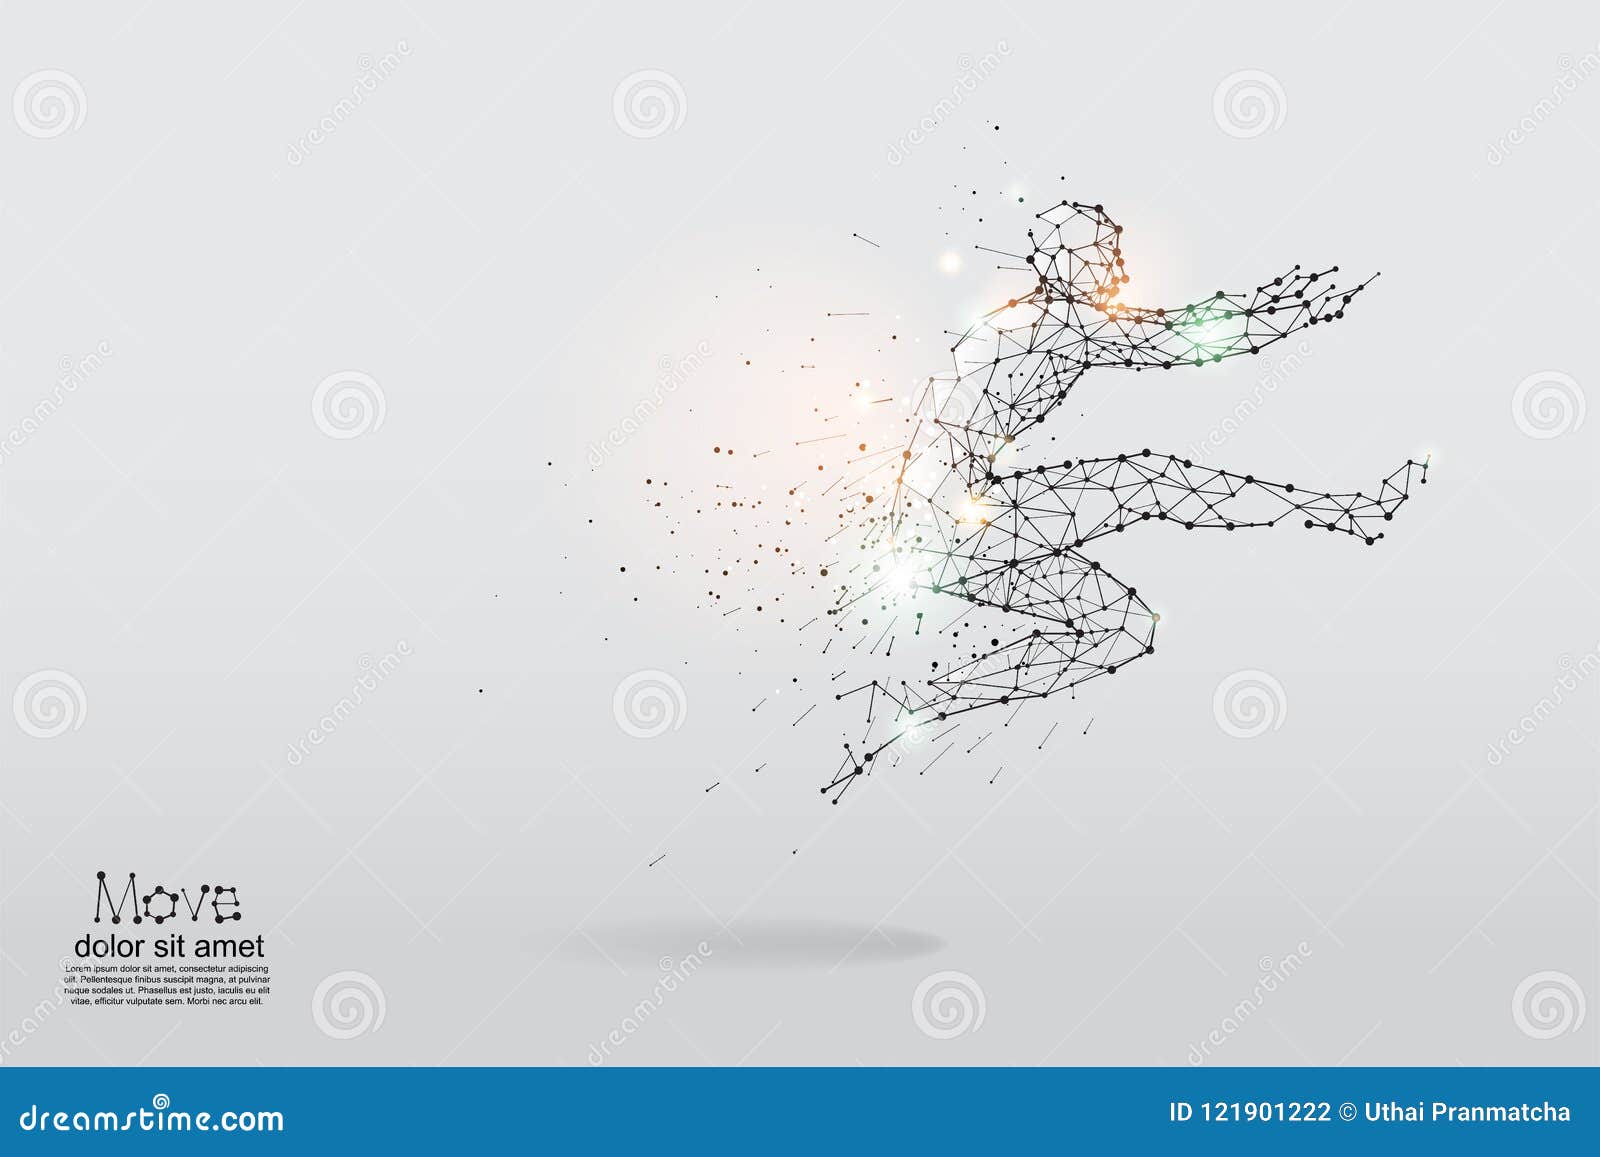 The Particles Geometric Art Line And Dot Of Human Jumping Stock Vector Illustration Of Life Dots